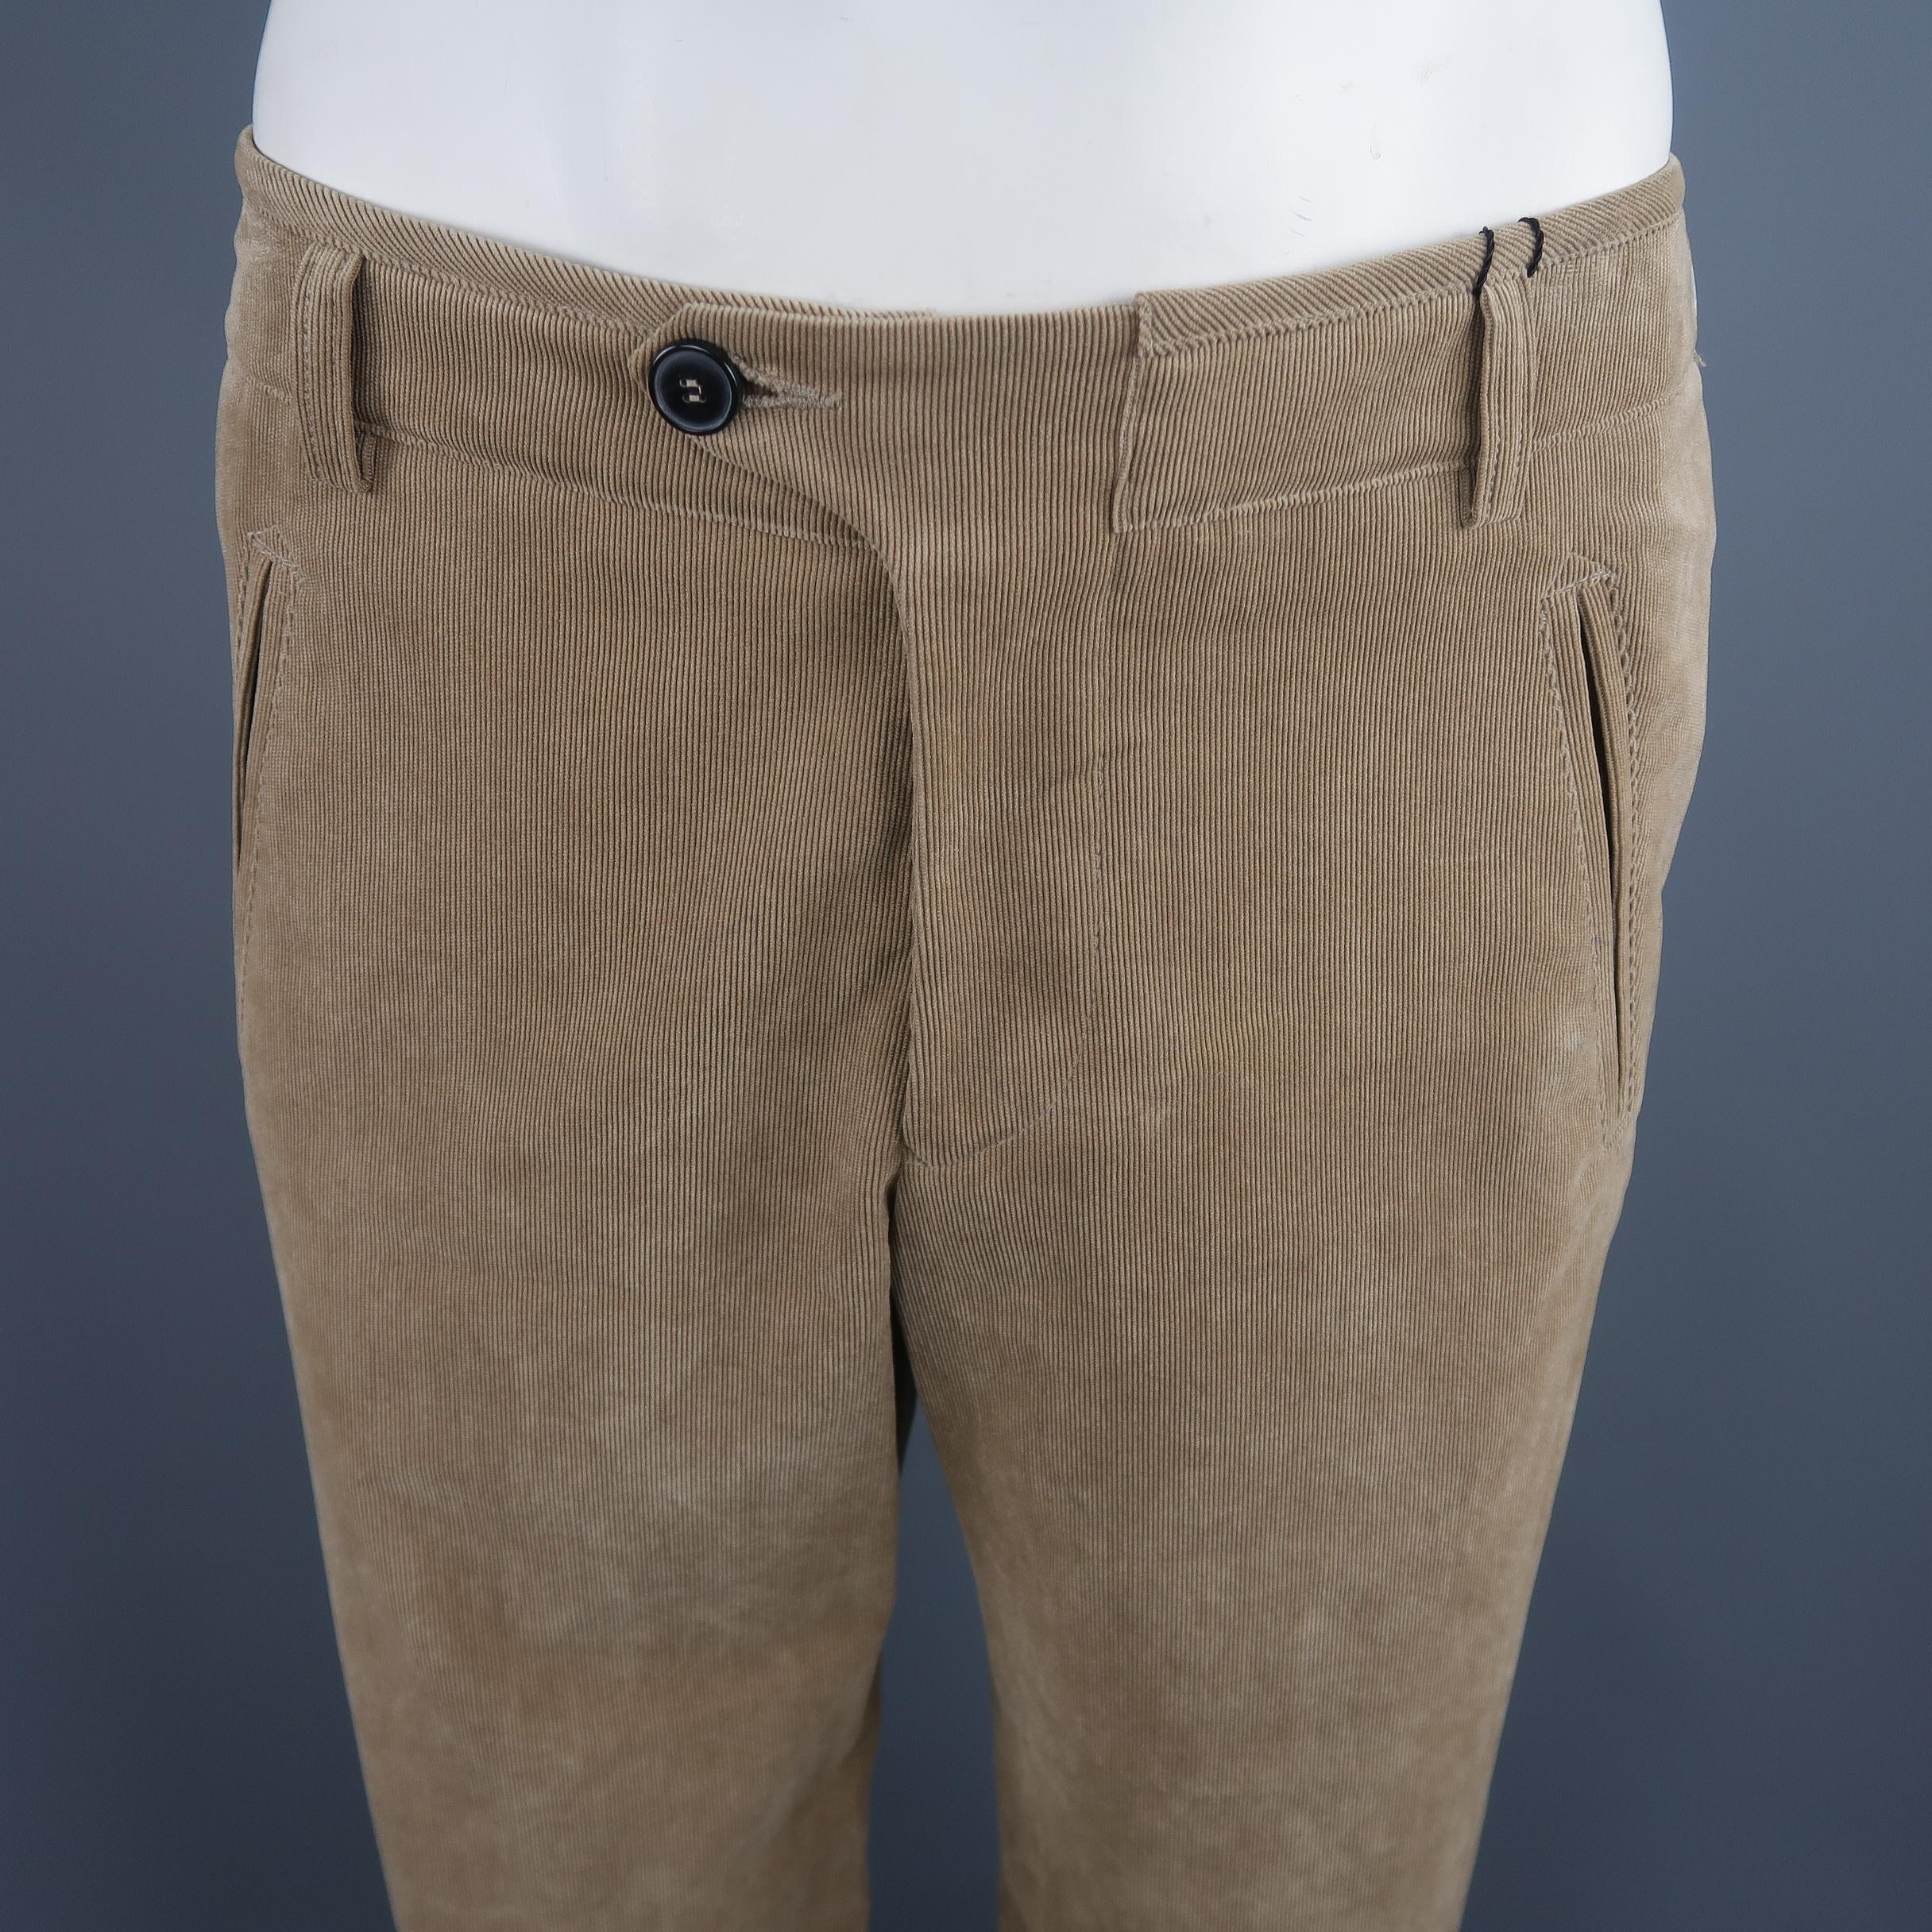 Giorgio Armani dress pants come in tan khaki corduroy with a button over waistband and slanted pockets. Made in Italy.
 
New with Tags.
Marked: IT 50
 
Measurements:
 
Waist: 34 in.
Rise: 10.5 in.
Inseam: 36 in.